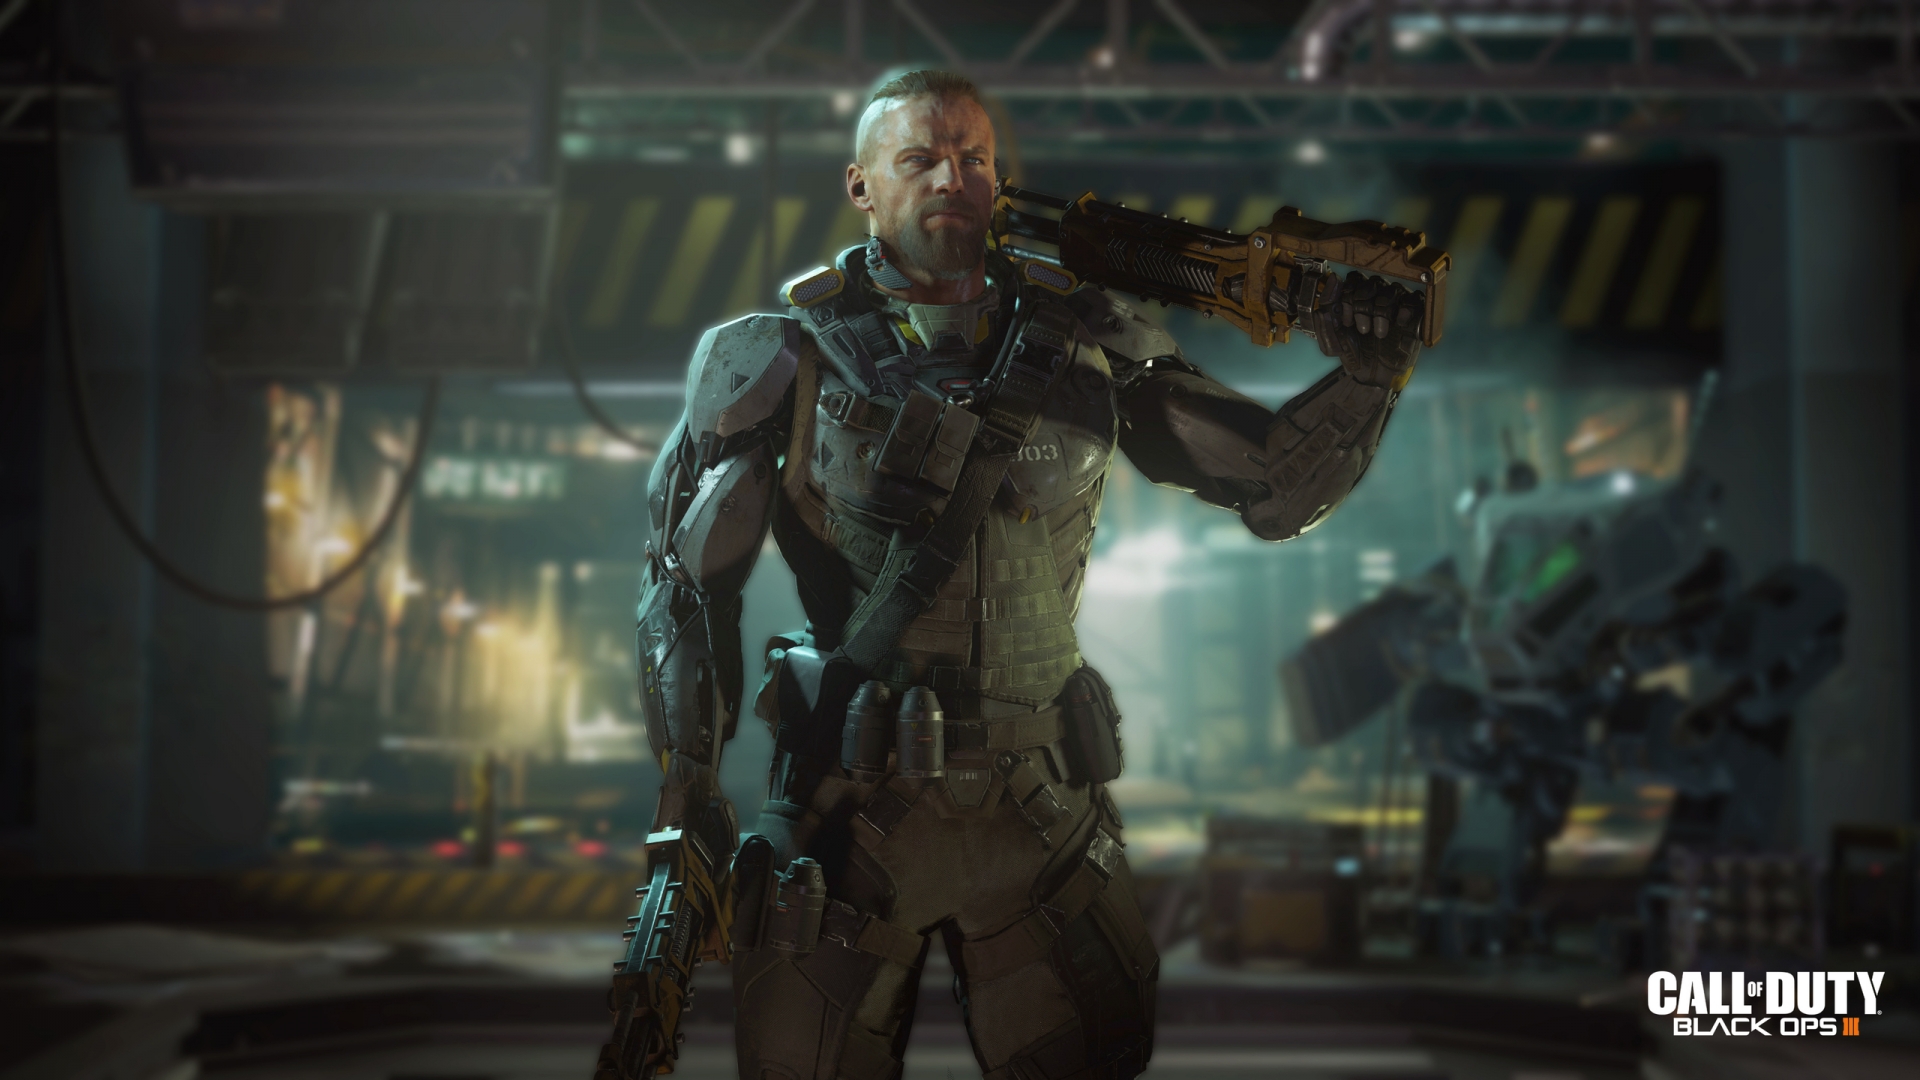 Call of Duty Black Ops 3 Specialist Ruin for 1920 x 1080 HDTV 1080p resolution